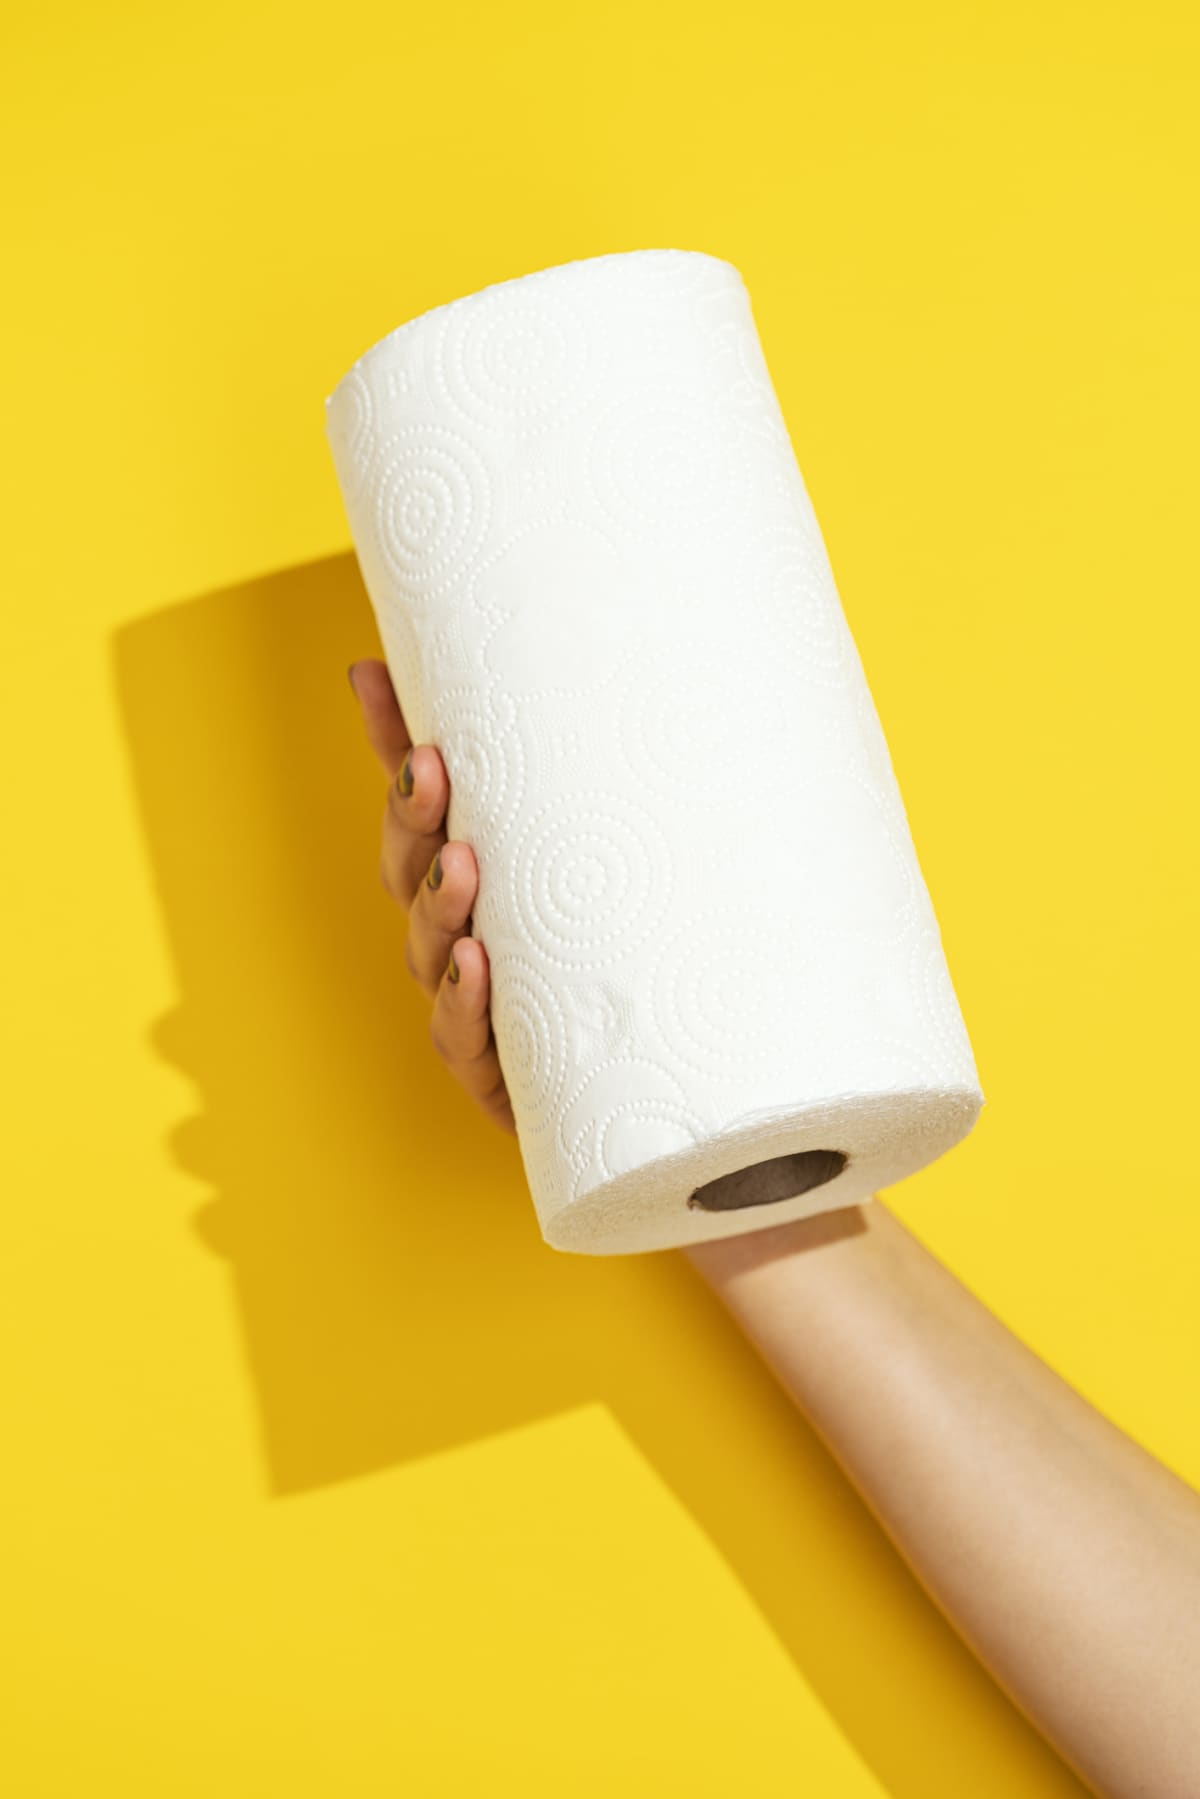 Hand holding paper towel roll on yellow background